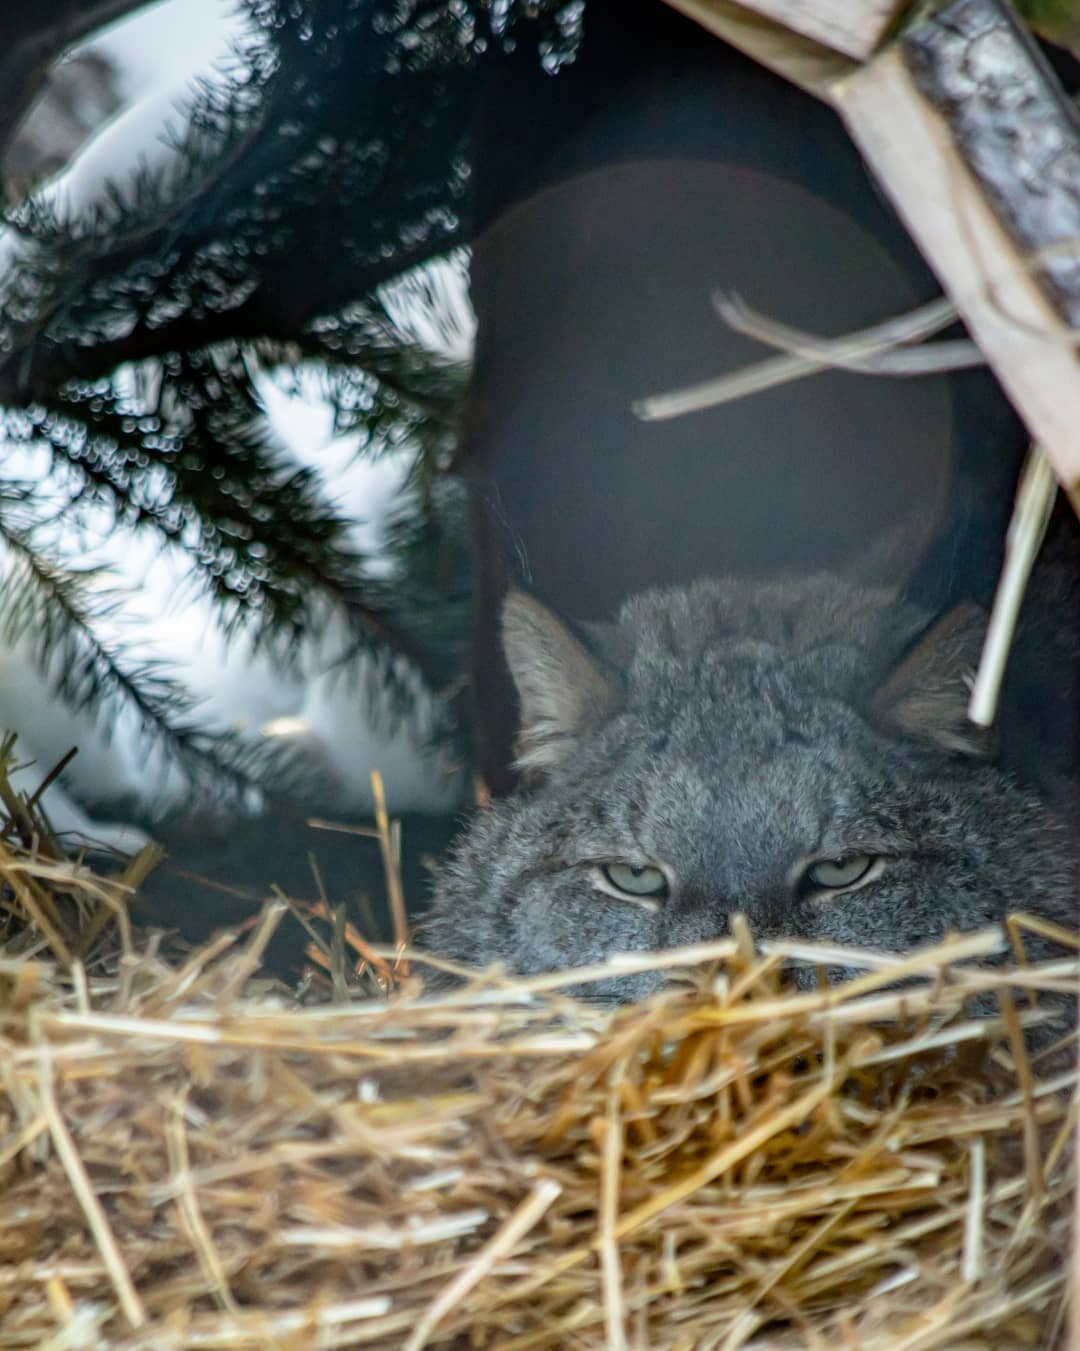 Sneaky lynx hiding in it's den. This one was at the Assiniboine park zoo last winter. I hear the zoo is reopening soon. Maybe someone can bring this kitty some warm tea.⁣
⁣
I'm also hiding myself these days, been isolated but it won't be for ever. Ho